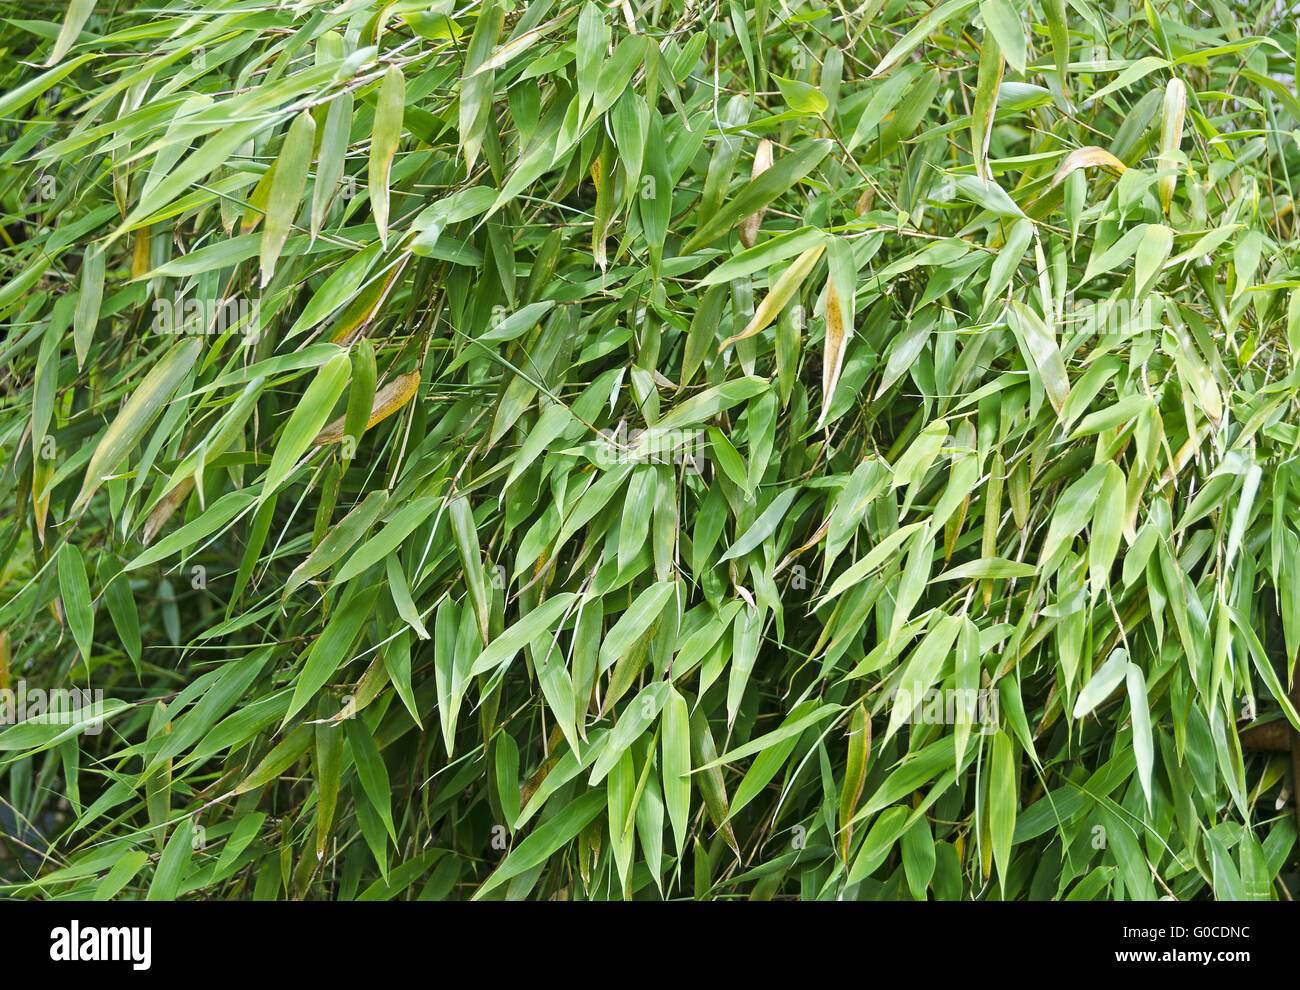 dense thicket from  green-leaved bamboo shrubs Stock Photo